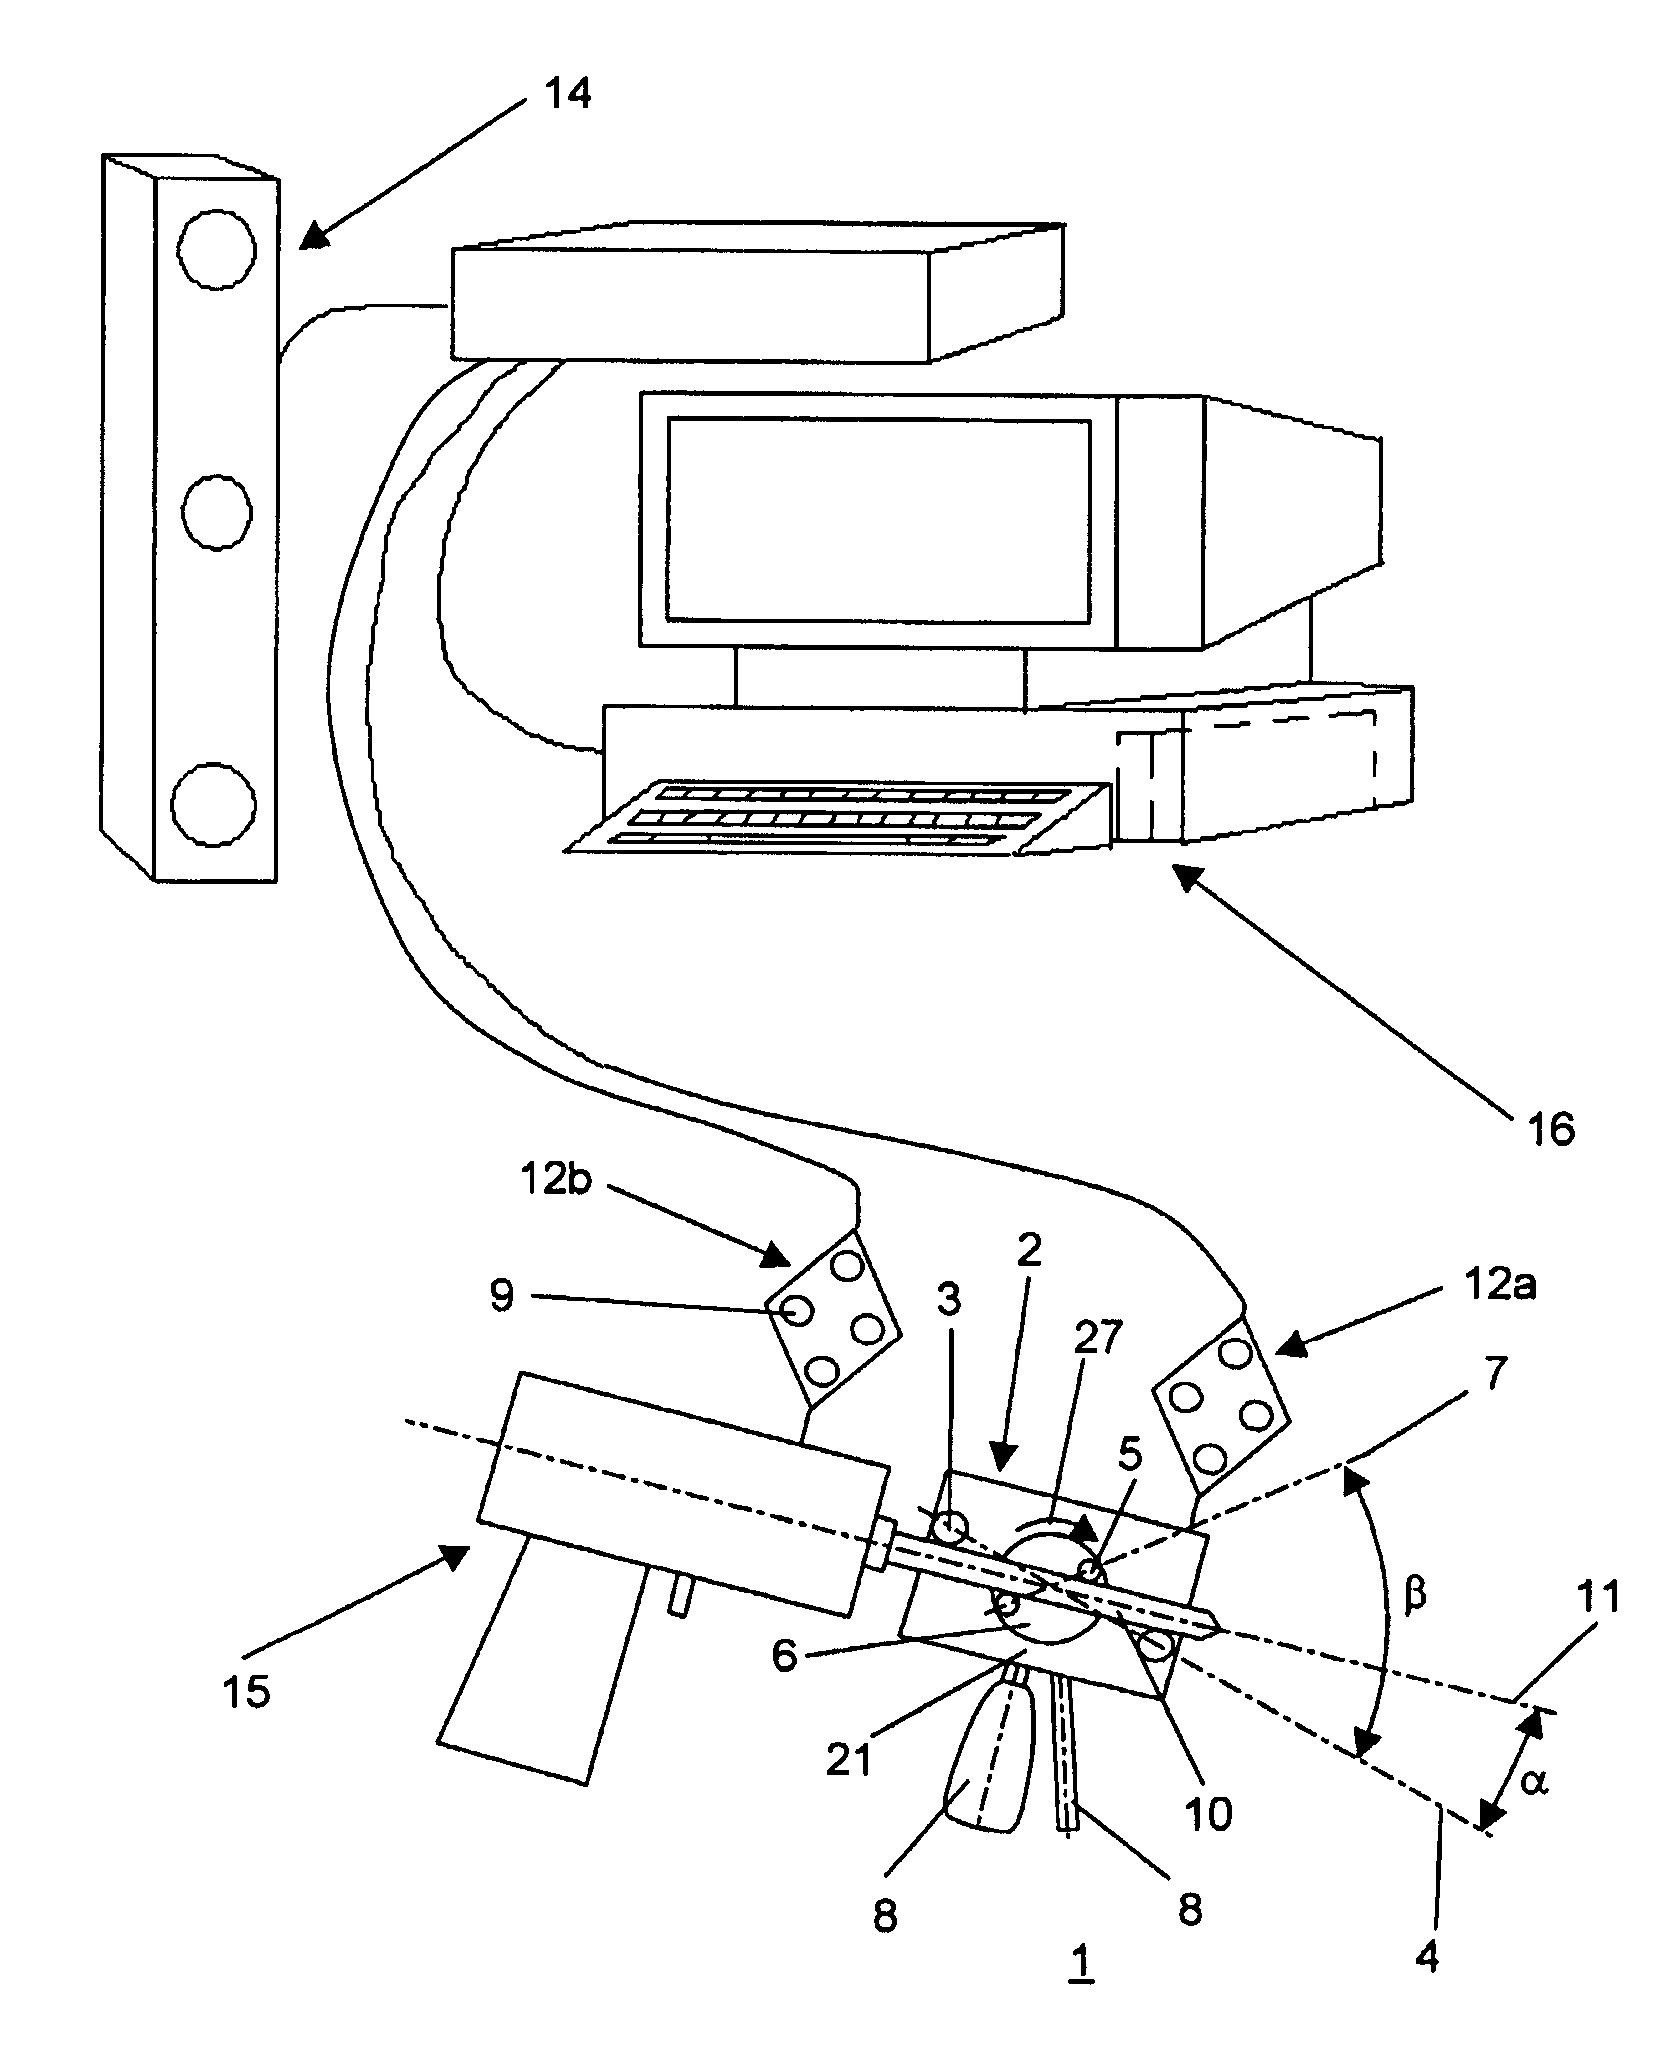 Device and process for calibrating geometrical measurements of surgical tools and orienting the same in space